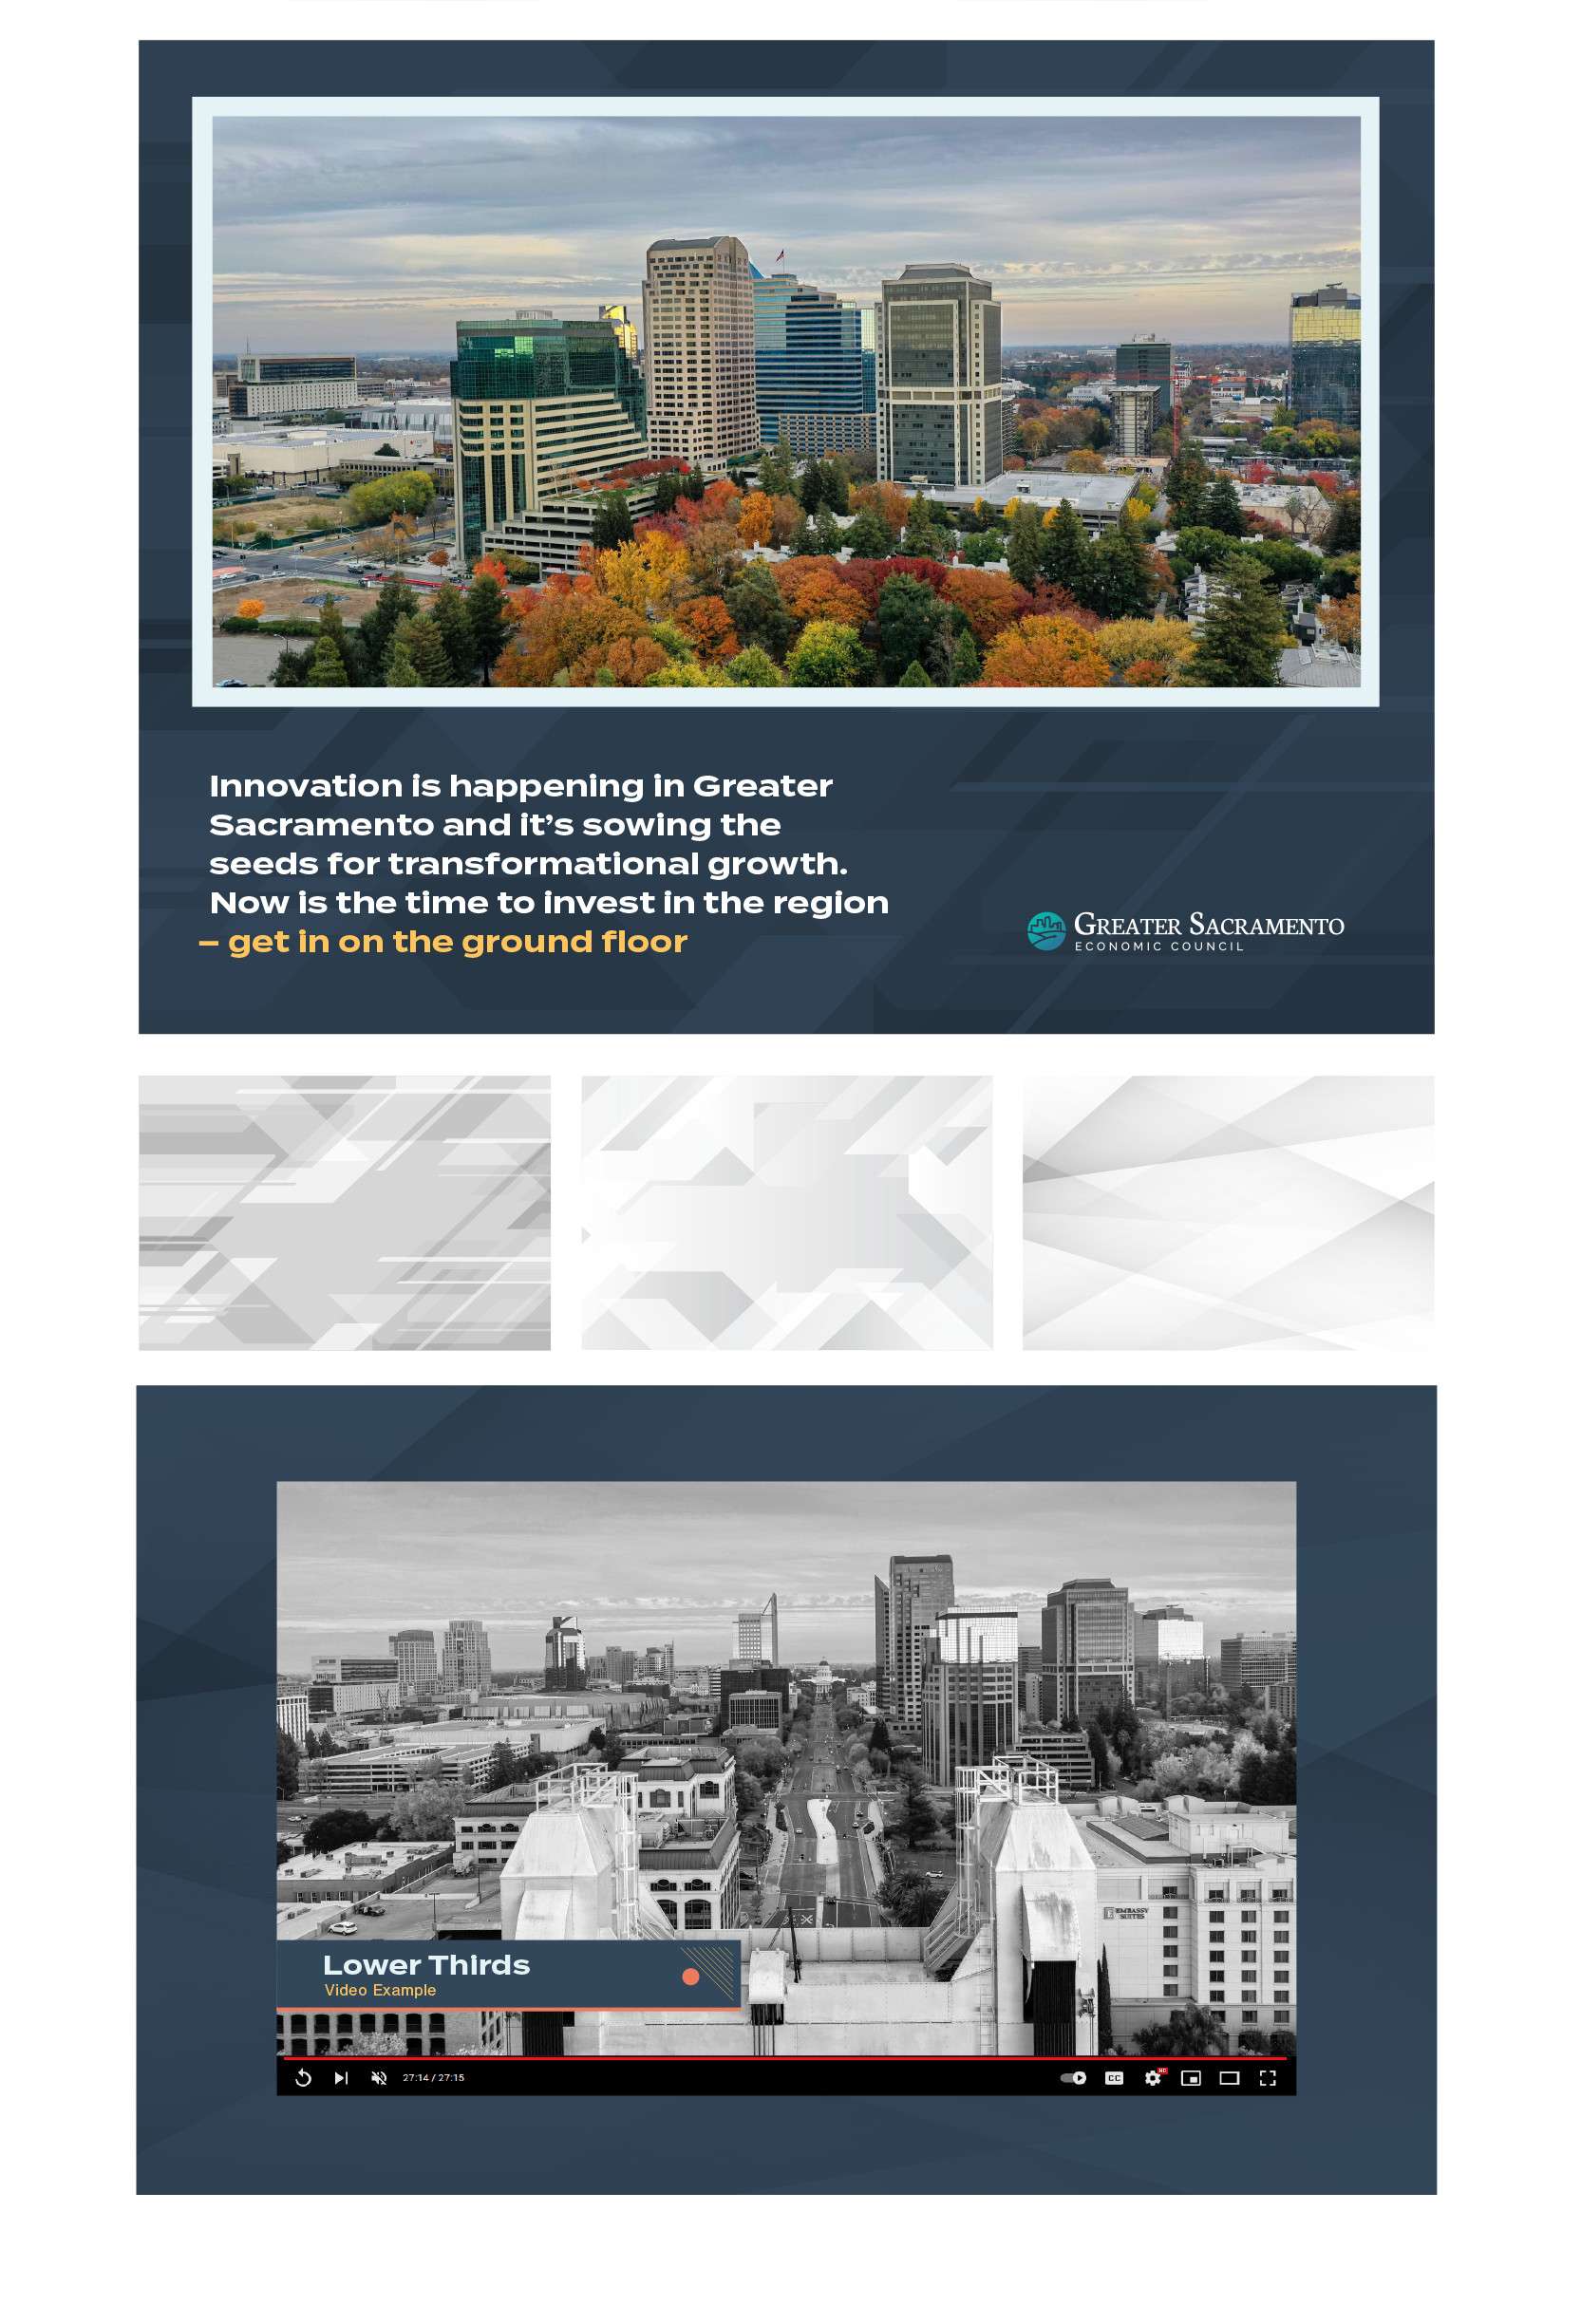 Joint Medias | Creative direction and campaign design project for the Greater Sacramento Economic Council